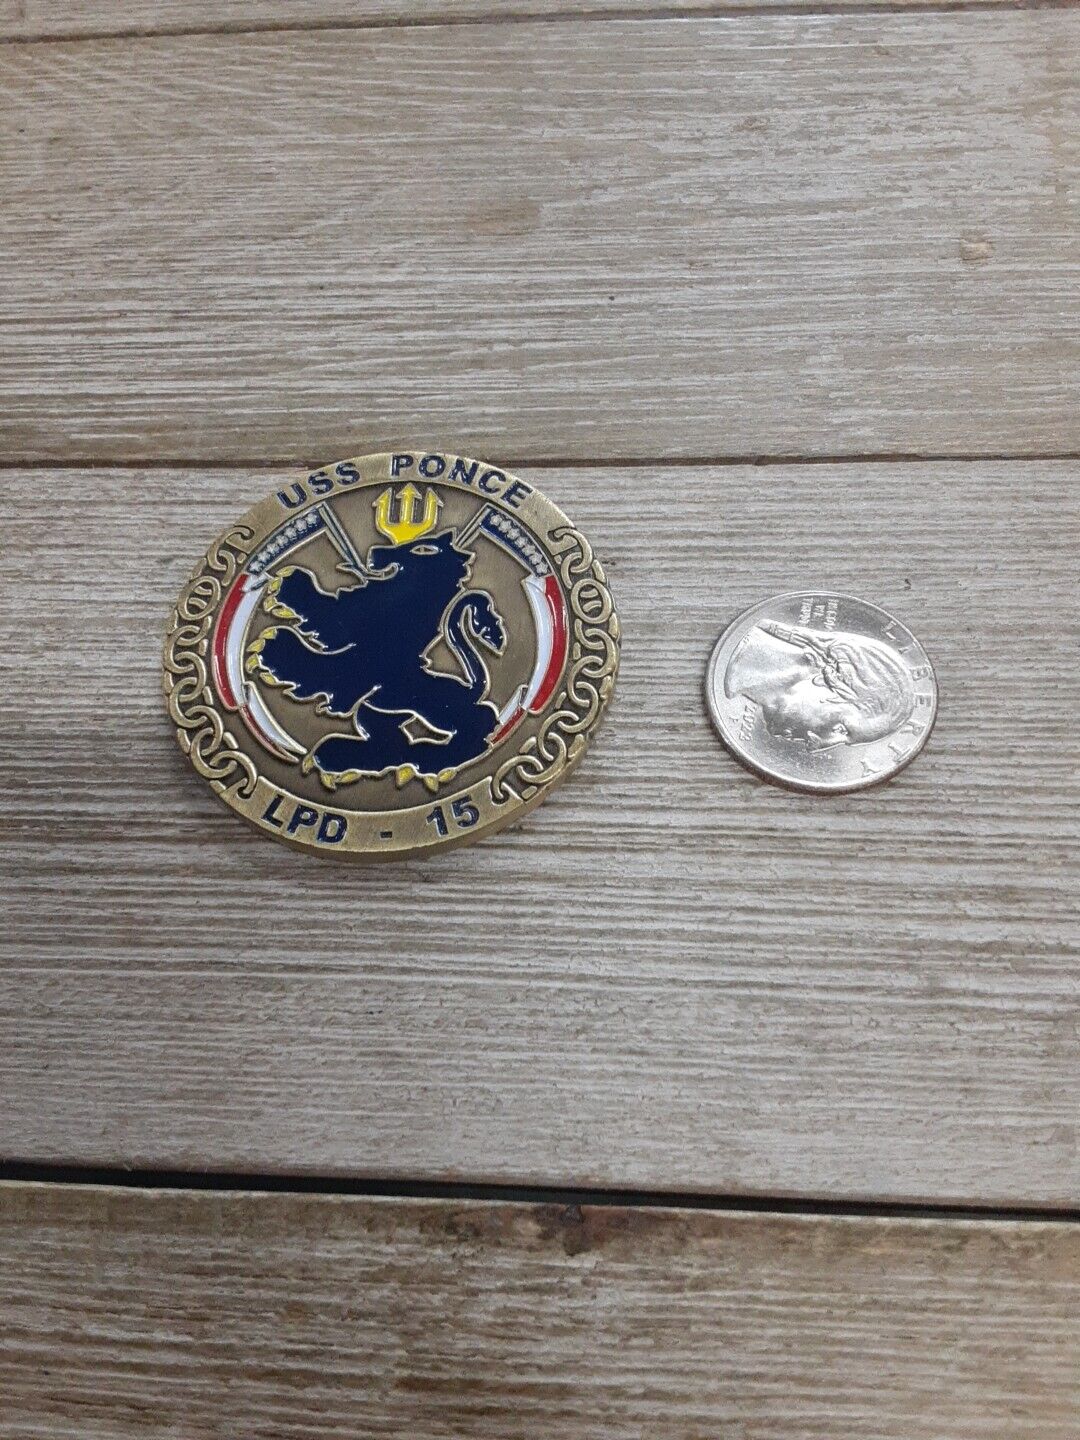 USS Ponce LPD 15 Final Deployment 2010 -2011 Challenge Coin